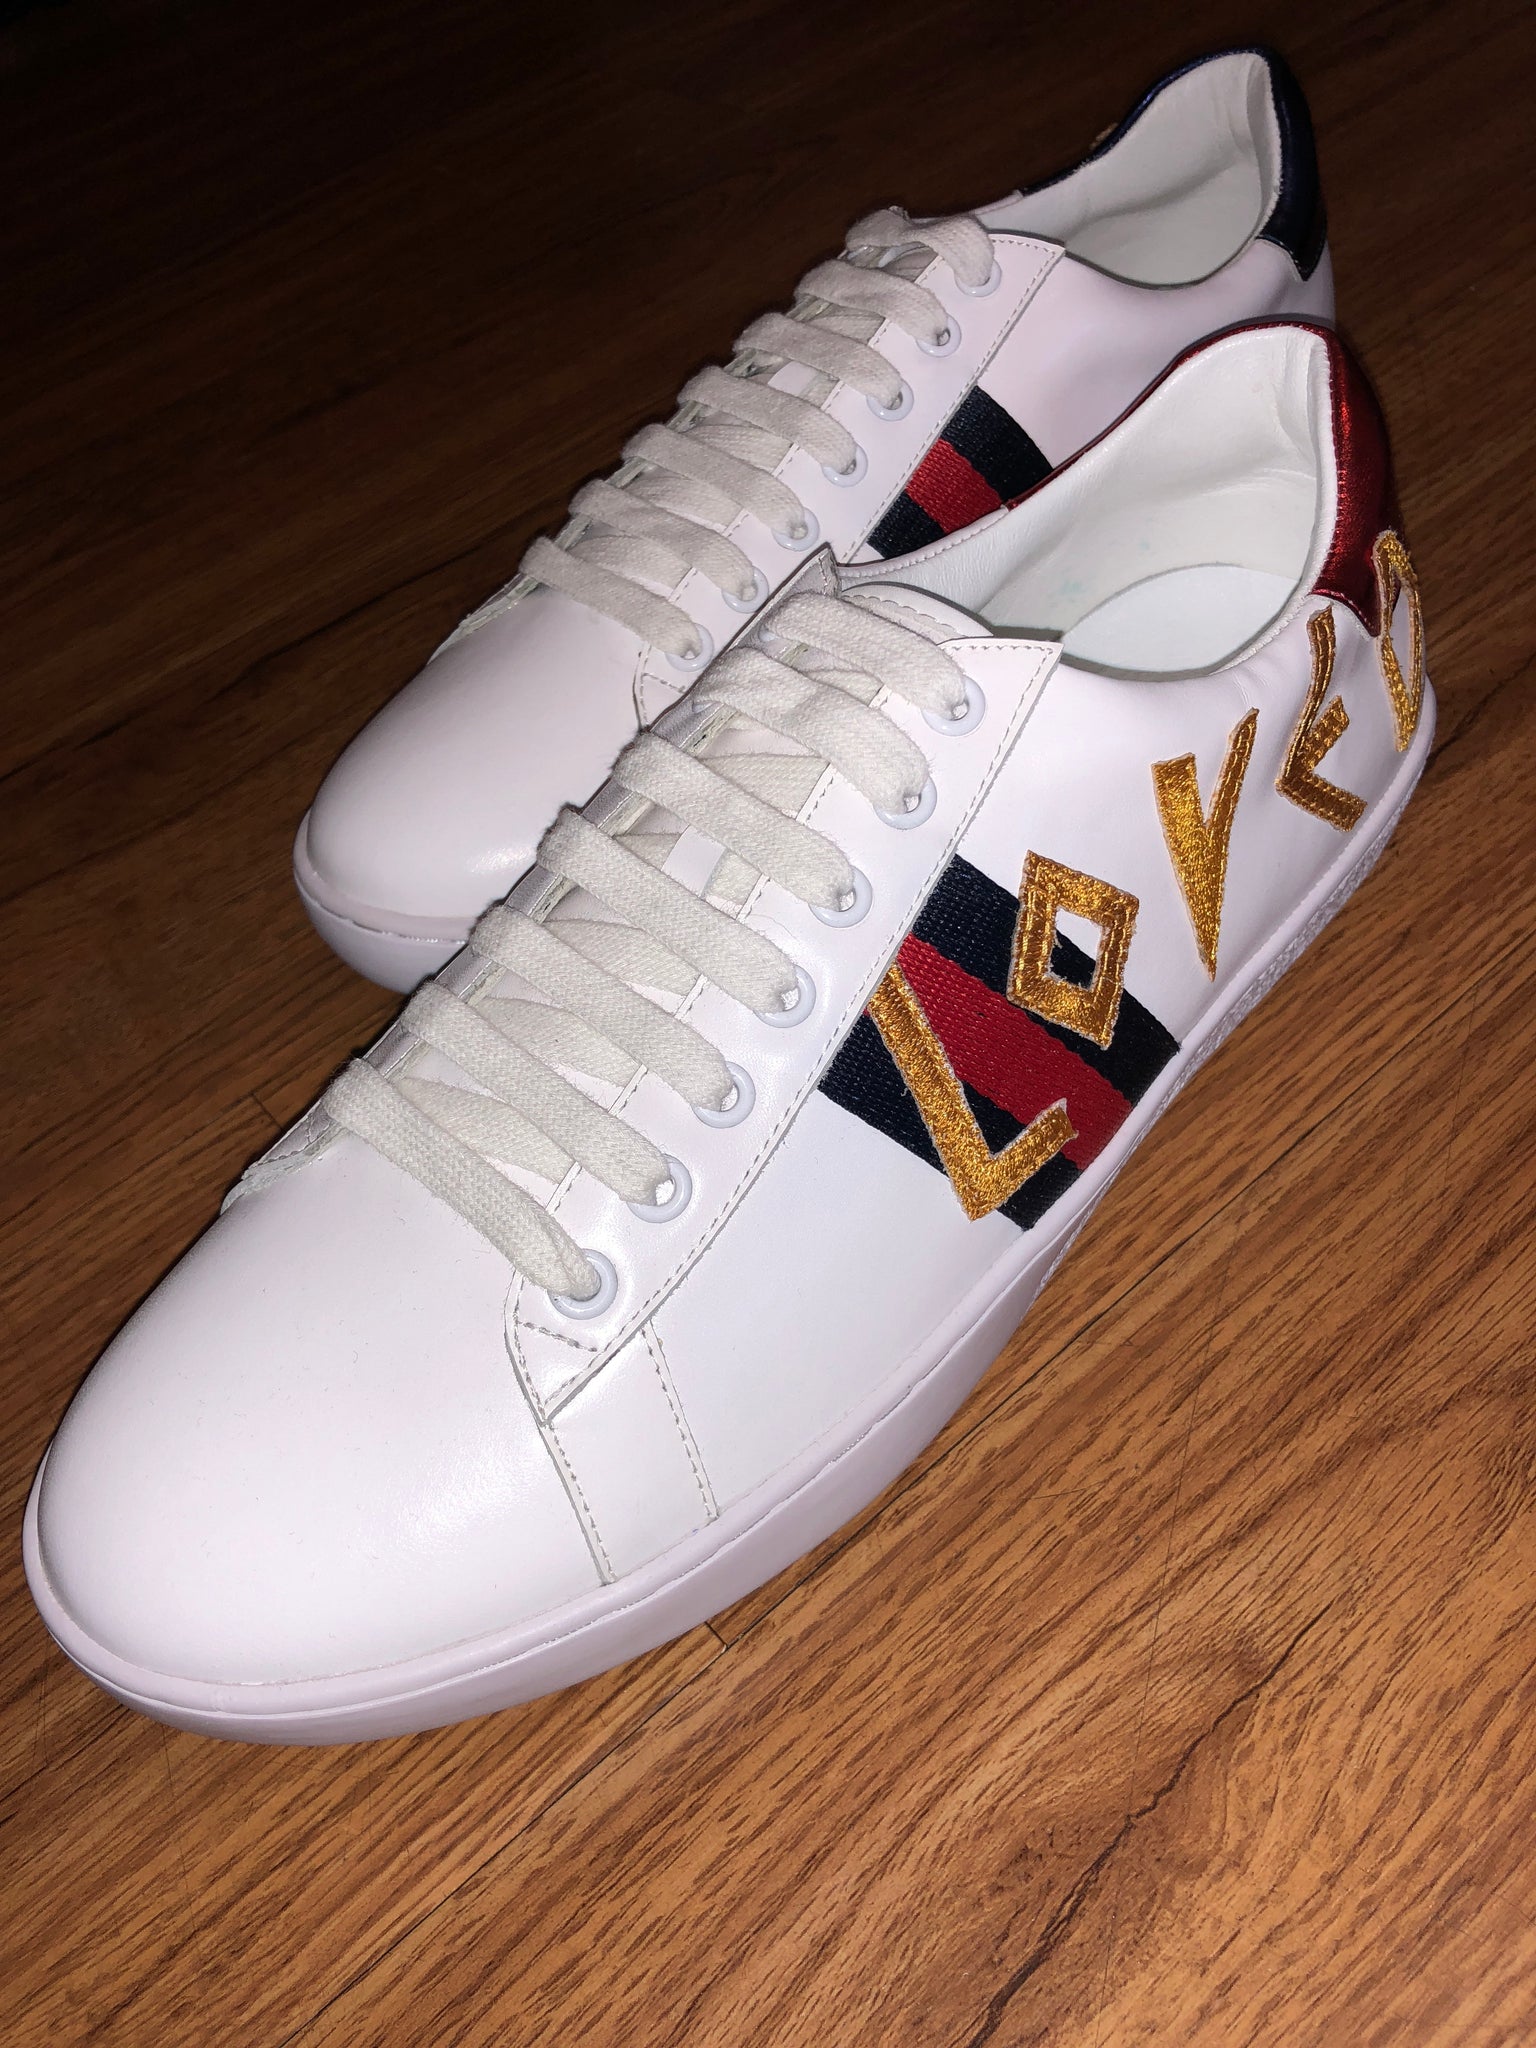 gucci sneakers fly cheap online